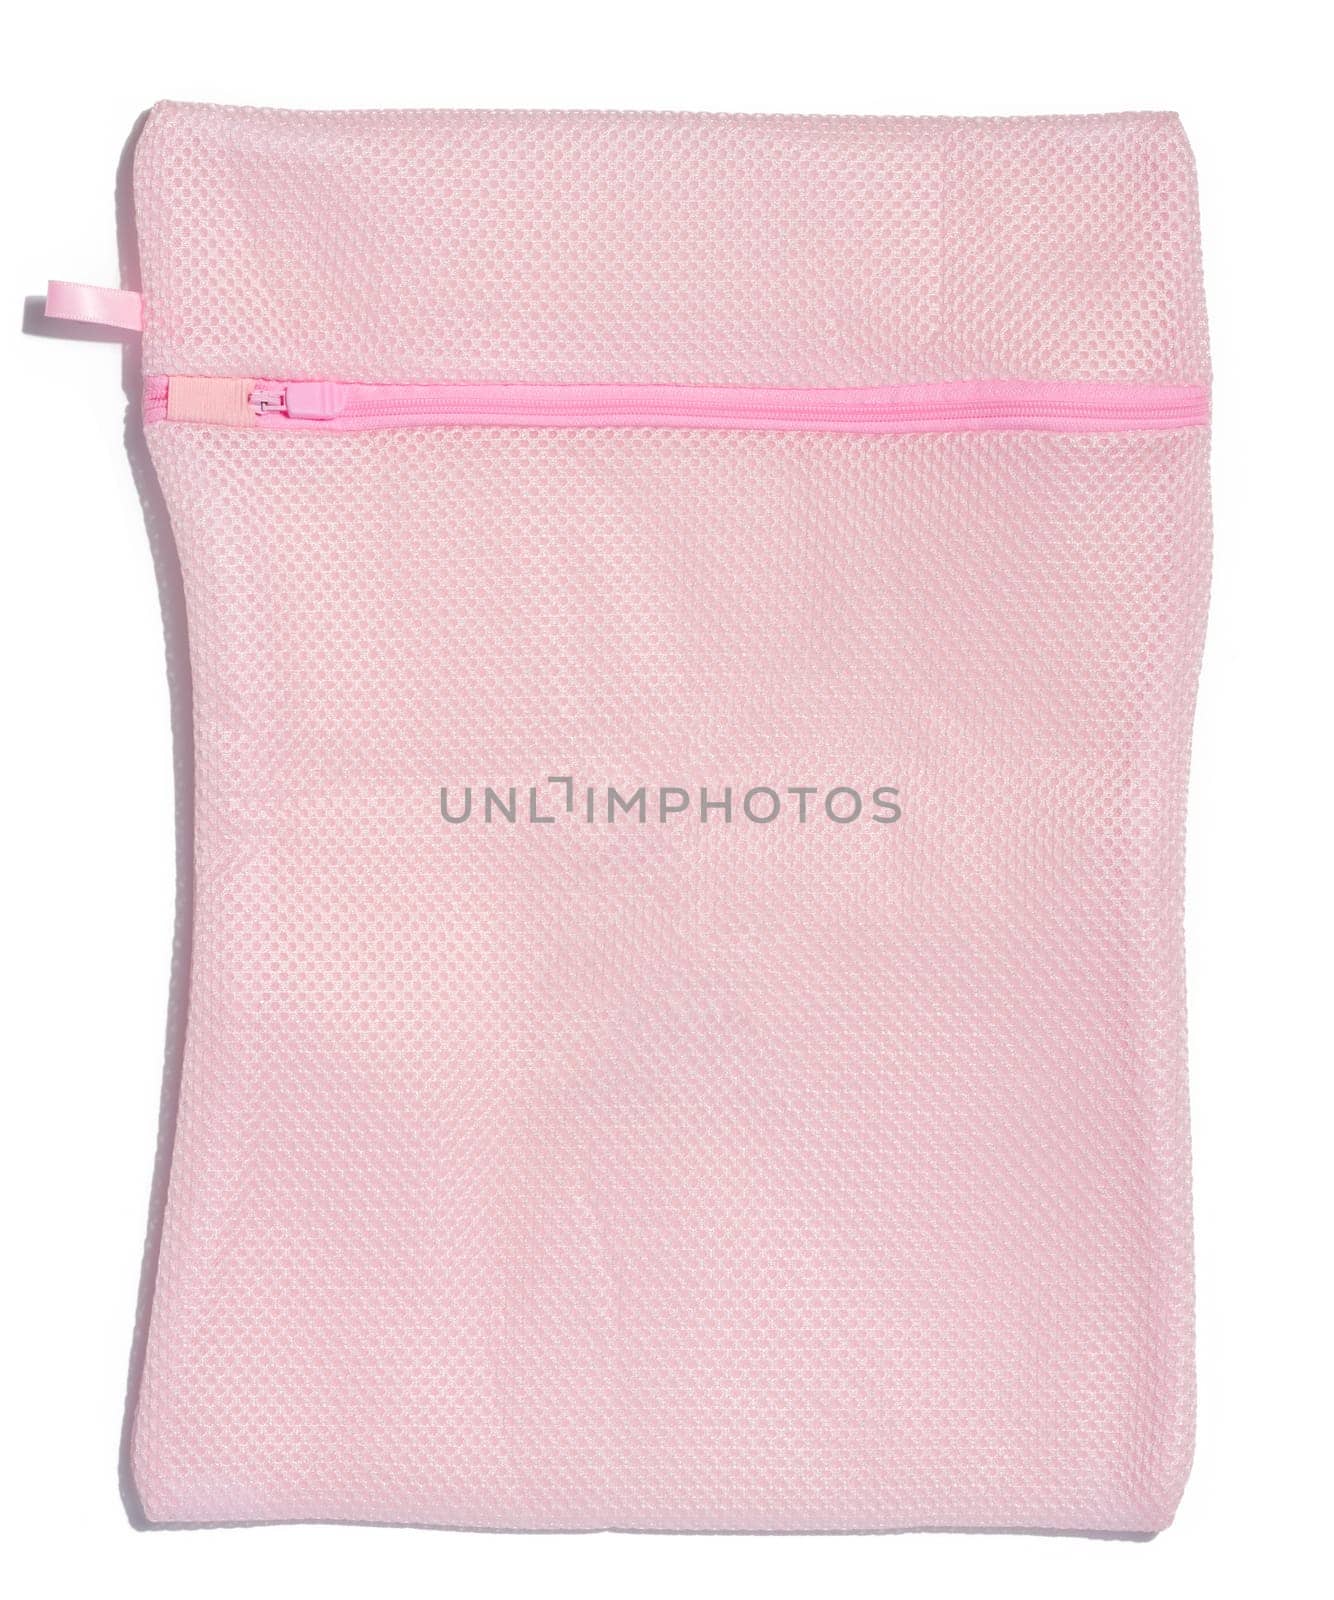 Pink bag for washing clothes in a washing machine on a white background